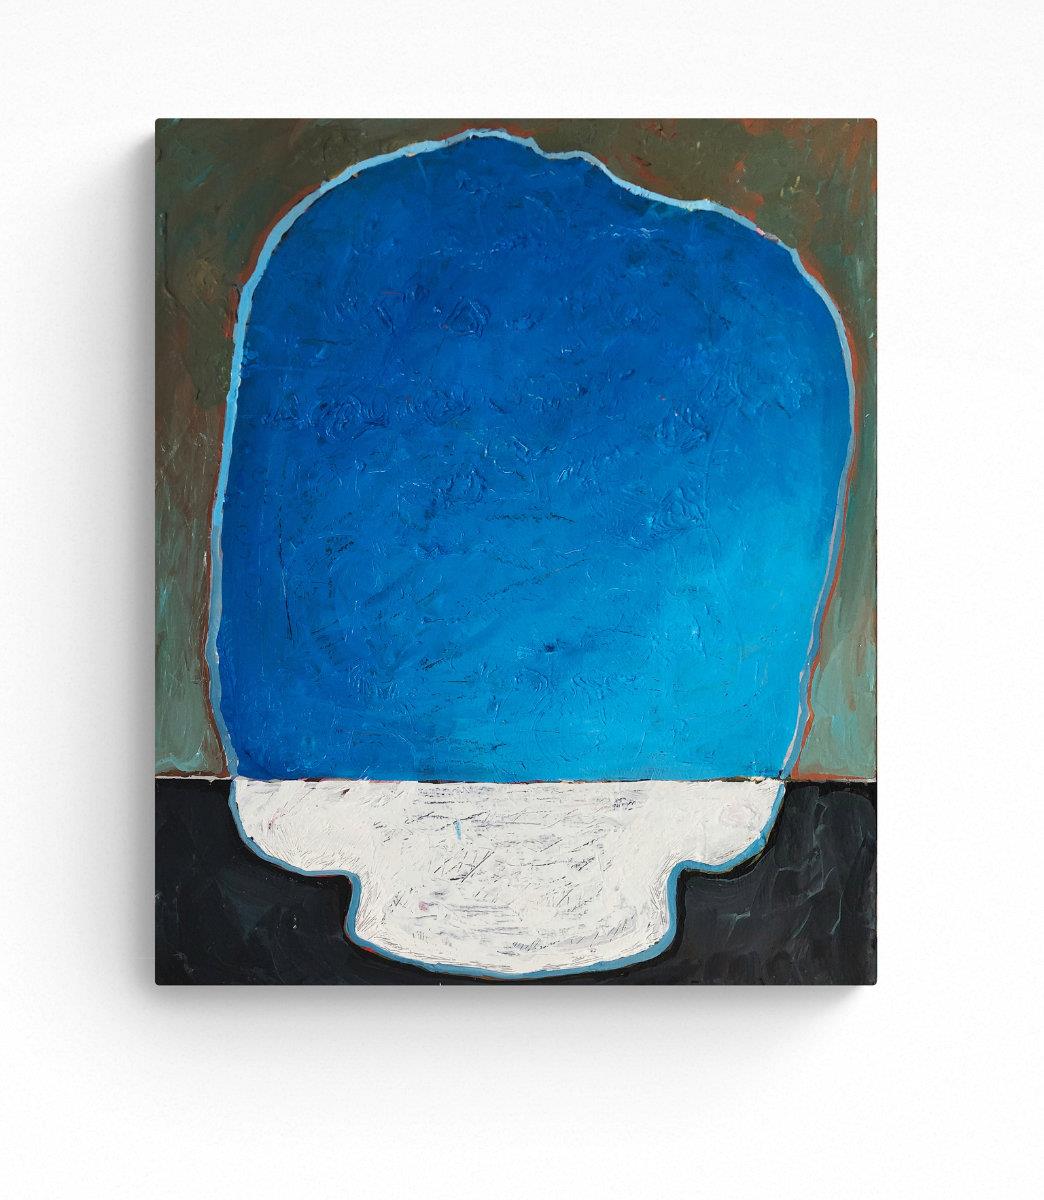 abstract oil painting in shades of blue and white loosely resembling a rock